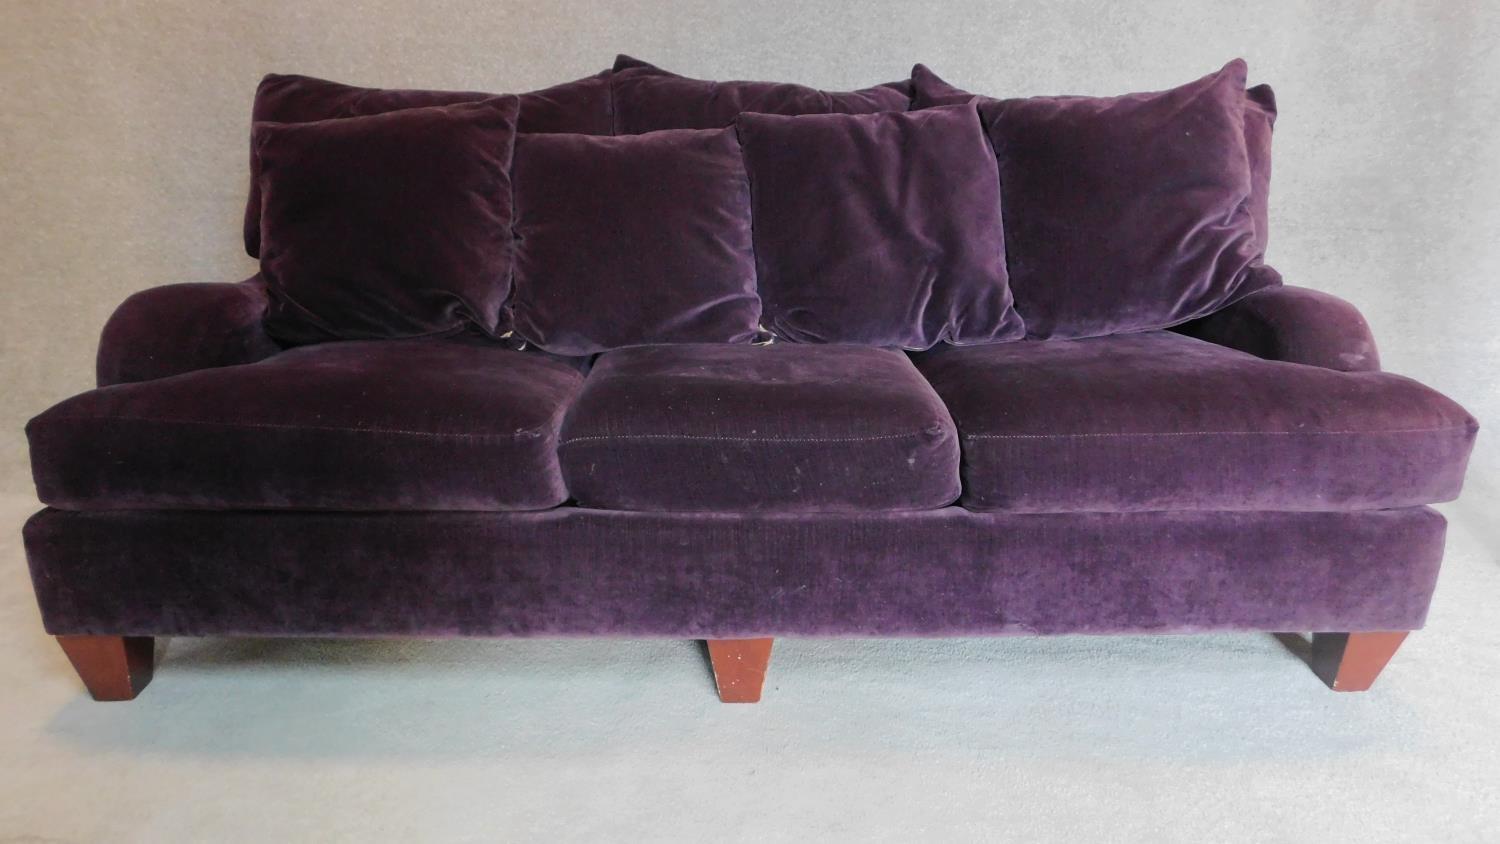 A Victorian style three seater sofa in purple velvet upholstery, makers label: Bernhardt. - Image 2 of 5